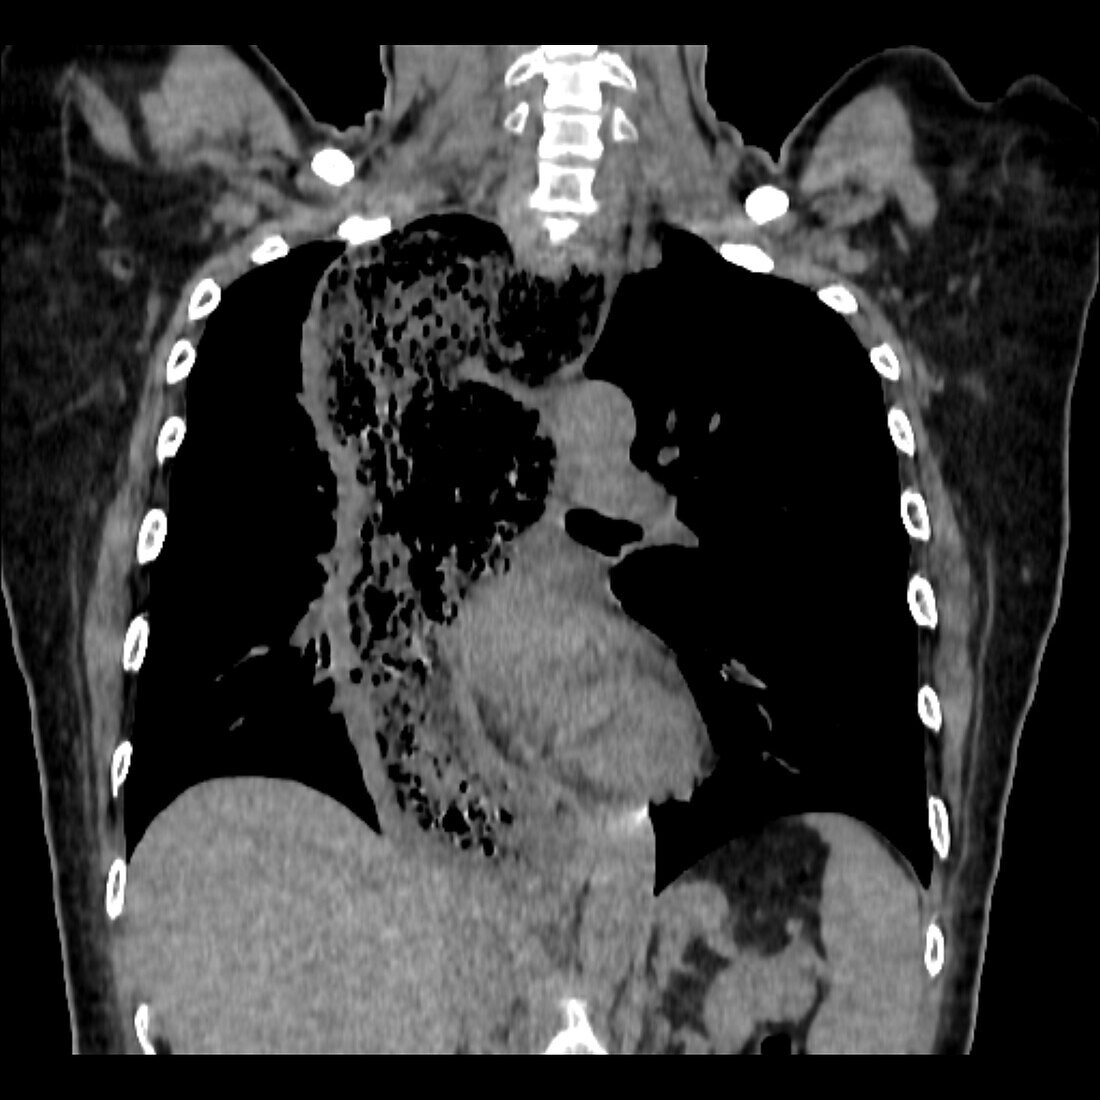 Achalasia of the oesophagus, CT scan